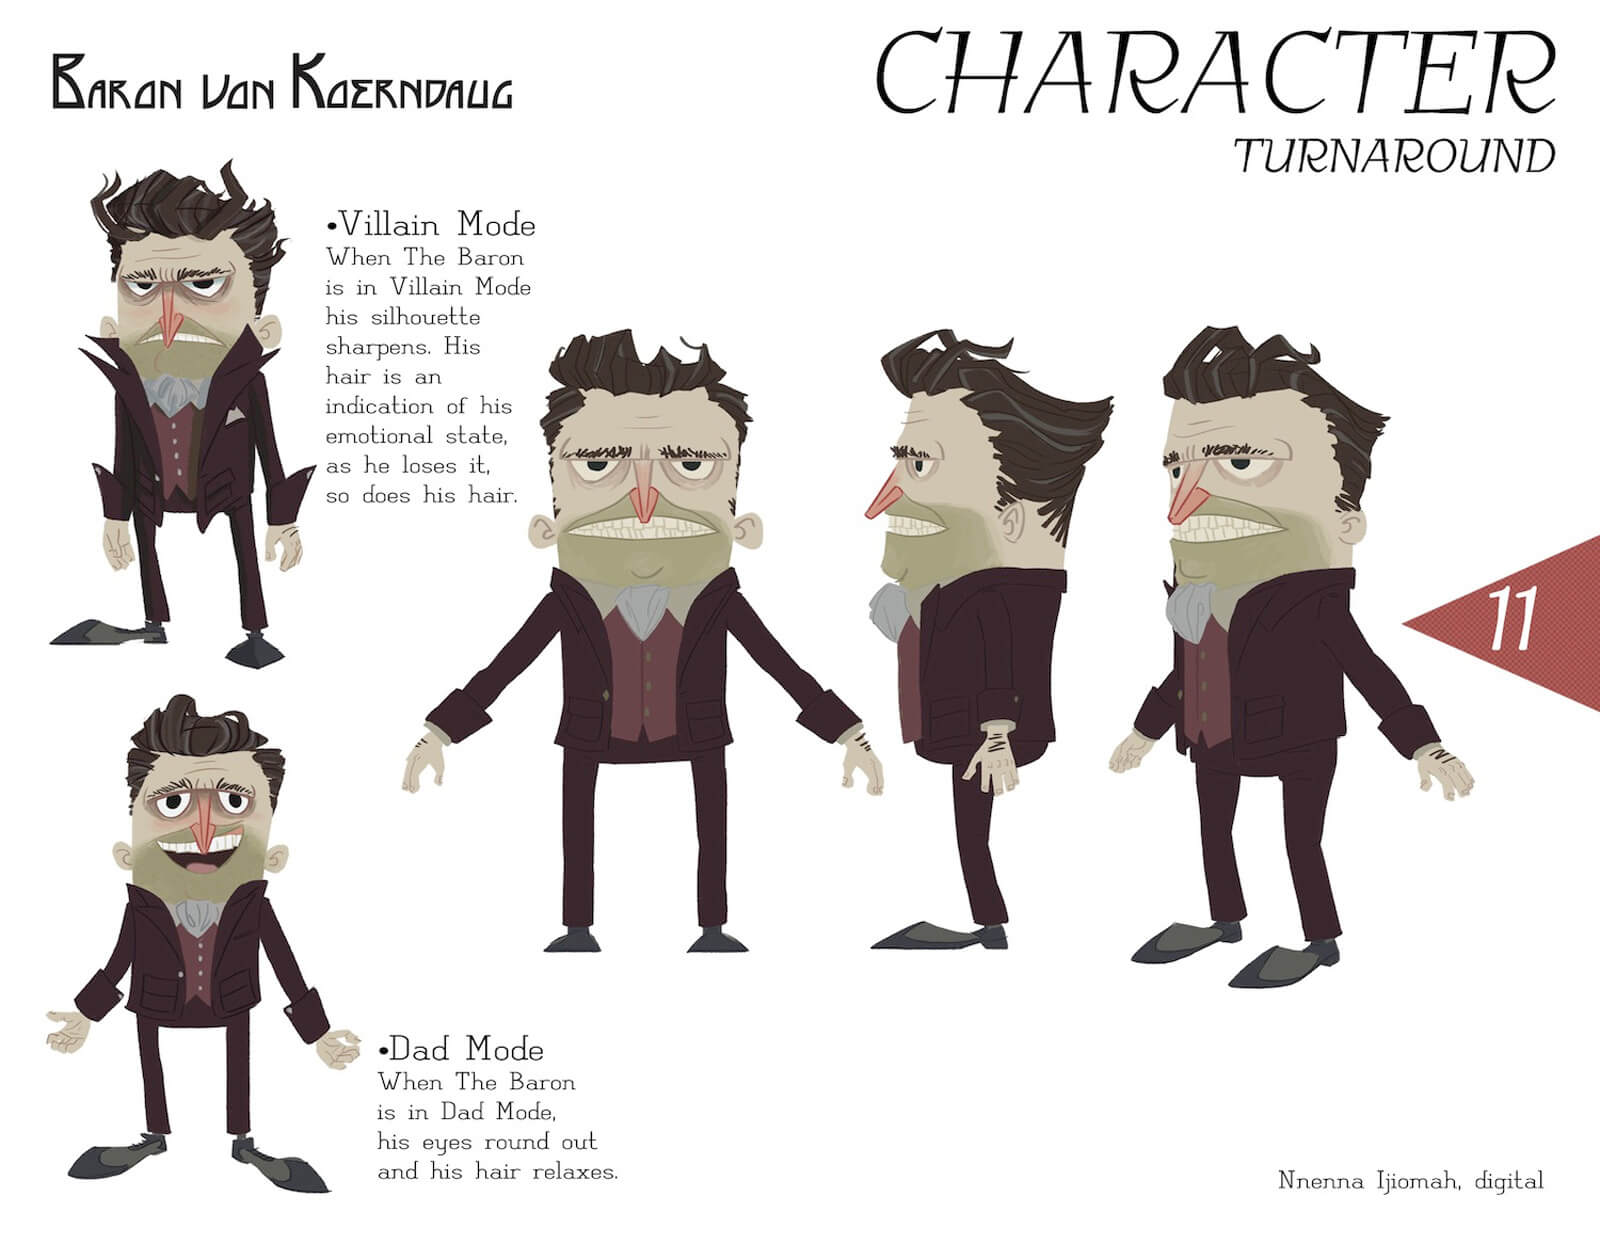 Character turnaround slide for Baron von Koerndaug, showing model from different angles and at different moods